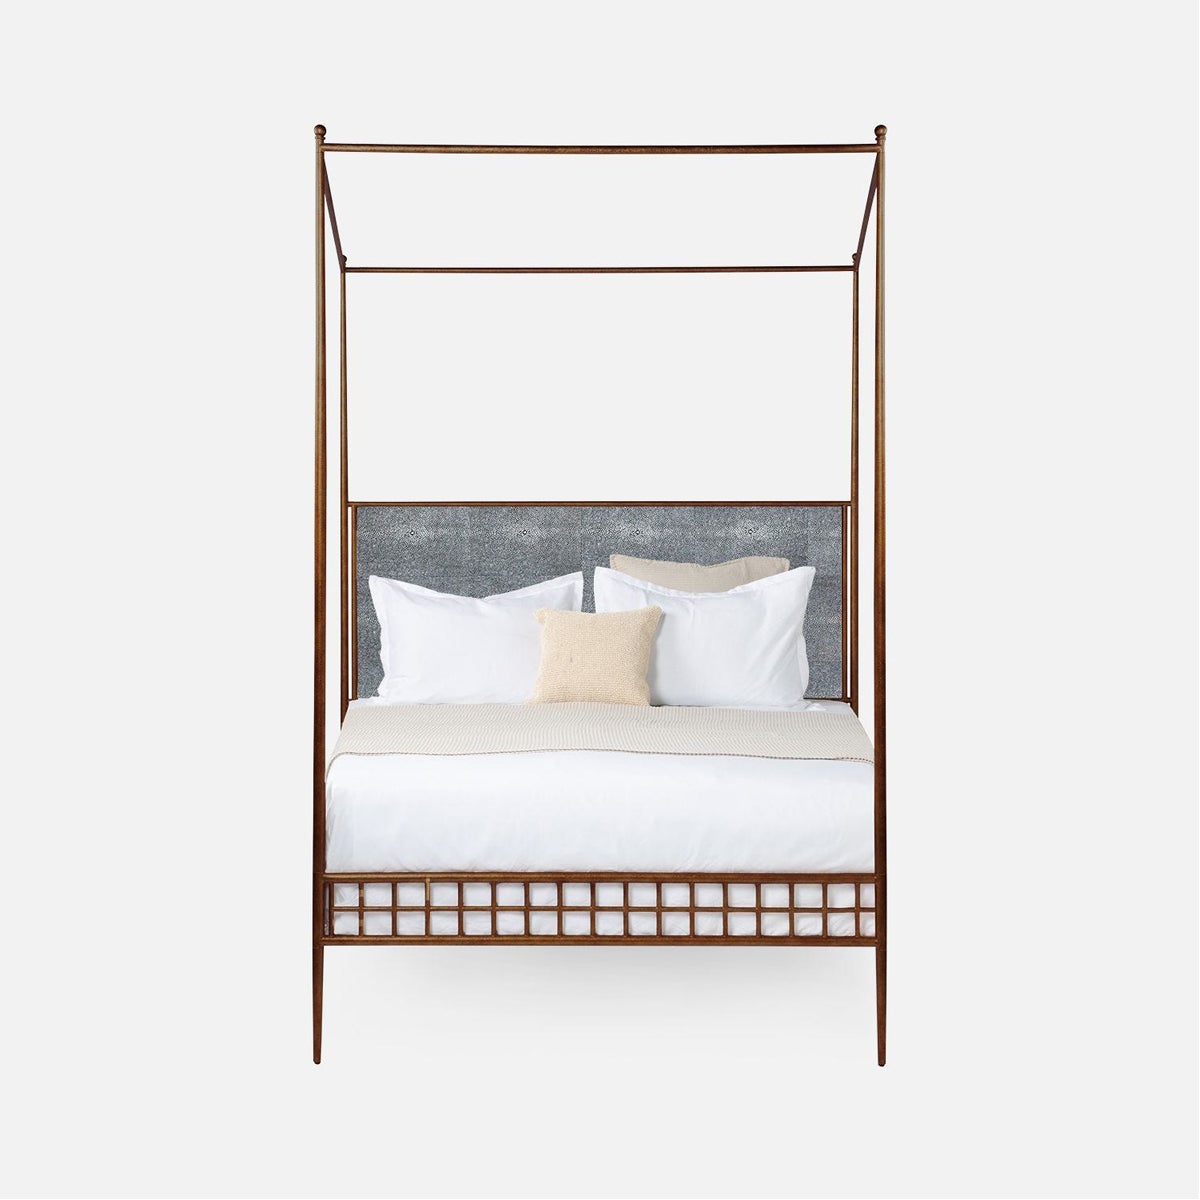 Made Goods Hamilton Textured Iron Canopy Bed in Danube Fabric